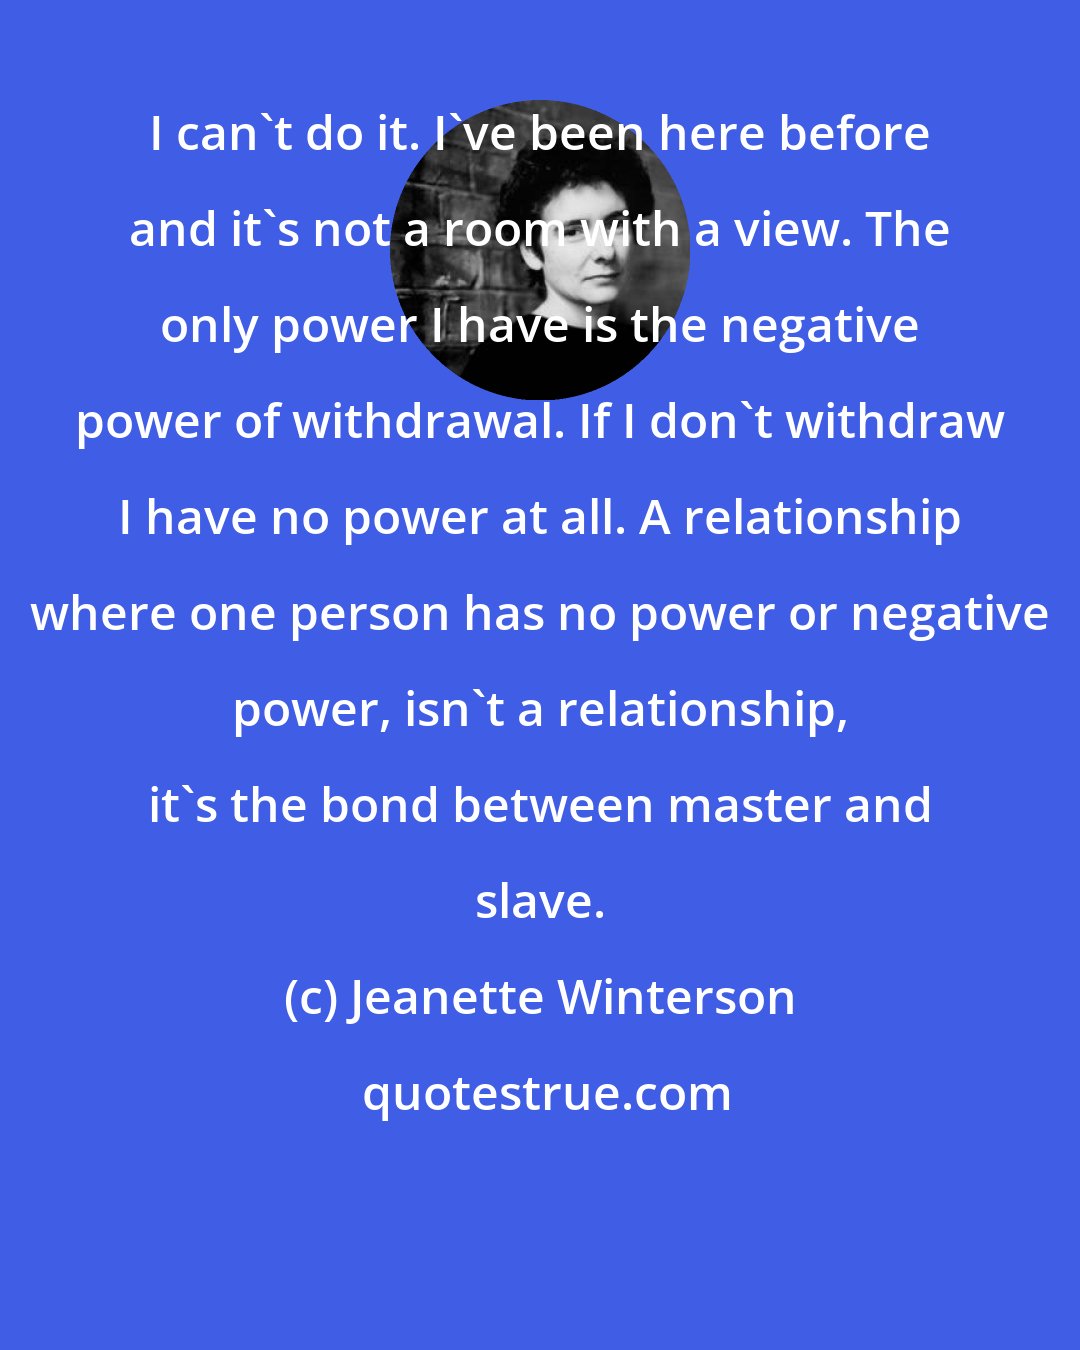 Jeanette Winterson: I can't do it. I've been here before and it's not a room with a view. The only power I have is the negative power of withdrawal. If I don't withdraw I have no power at all. A relationship where one person has no power or negative power, isn't a relationship, it's the bond between master and slave.